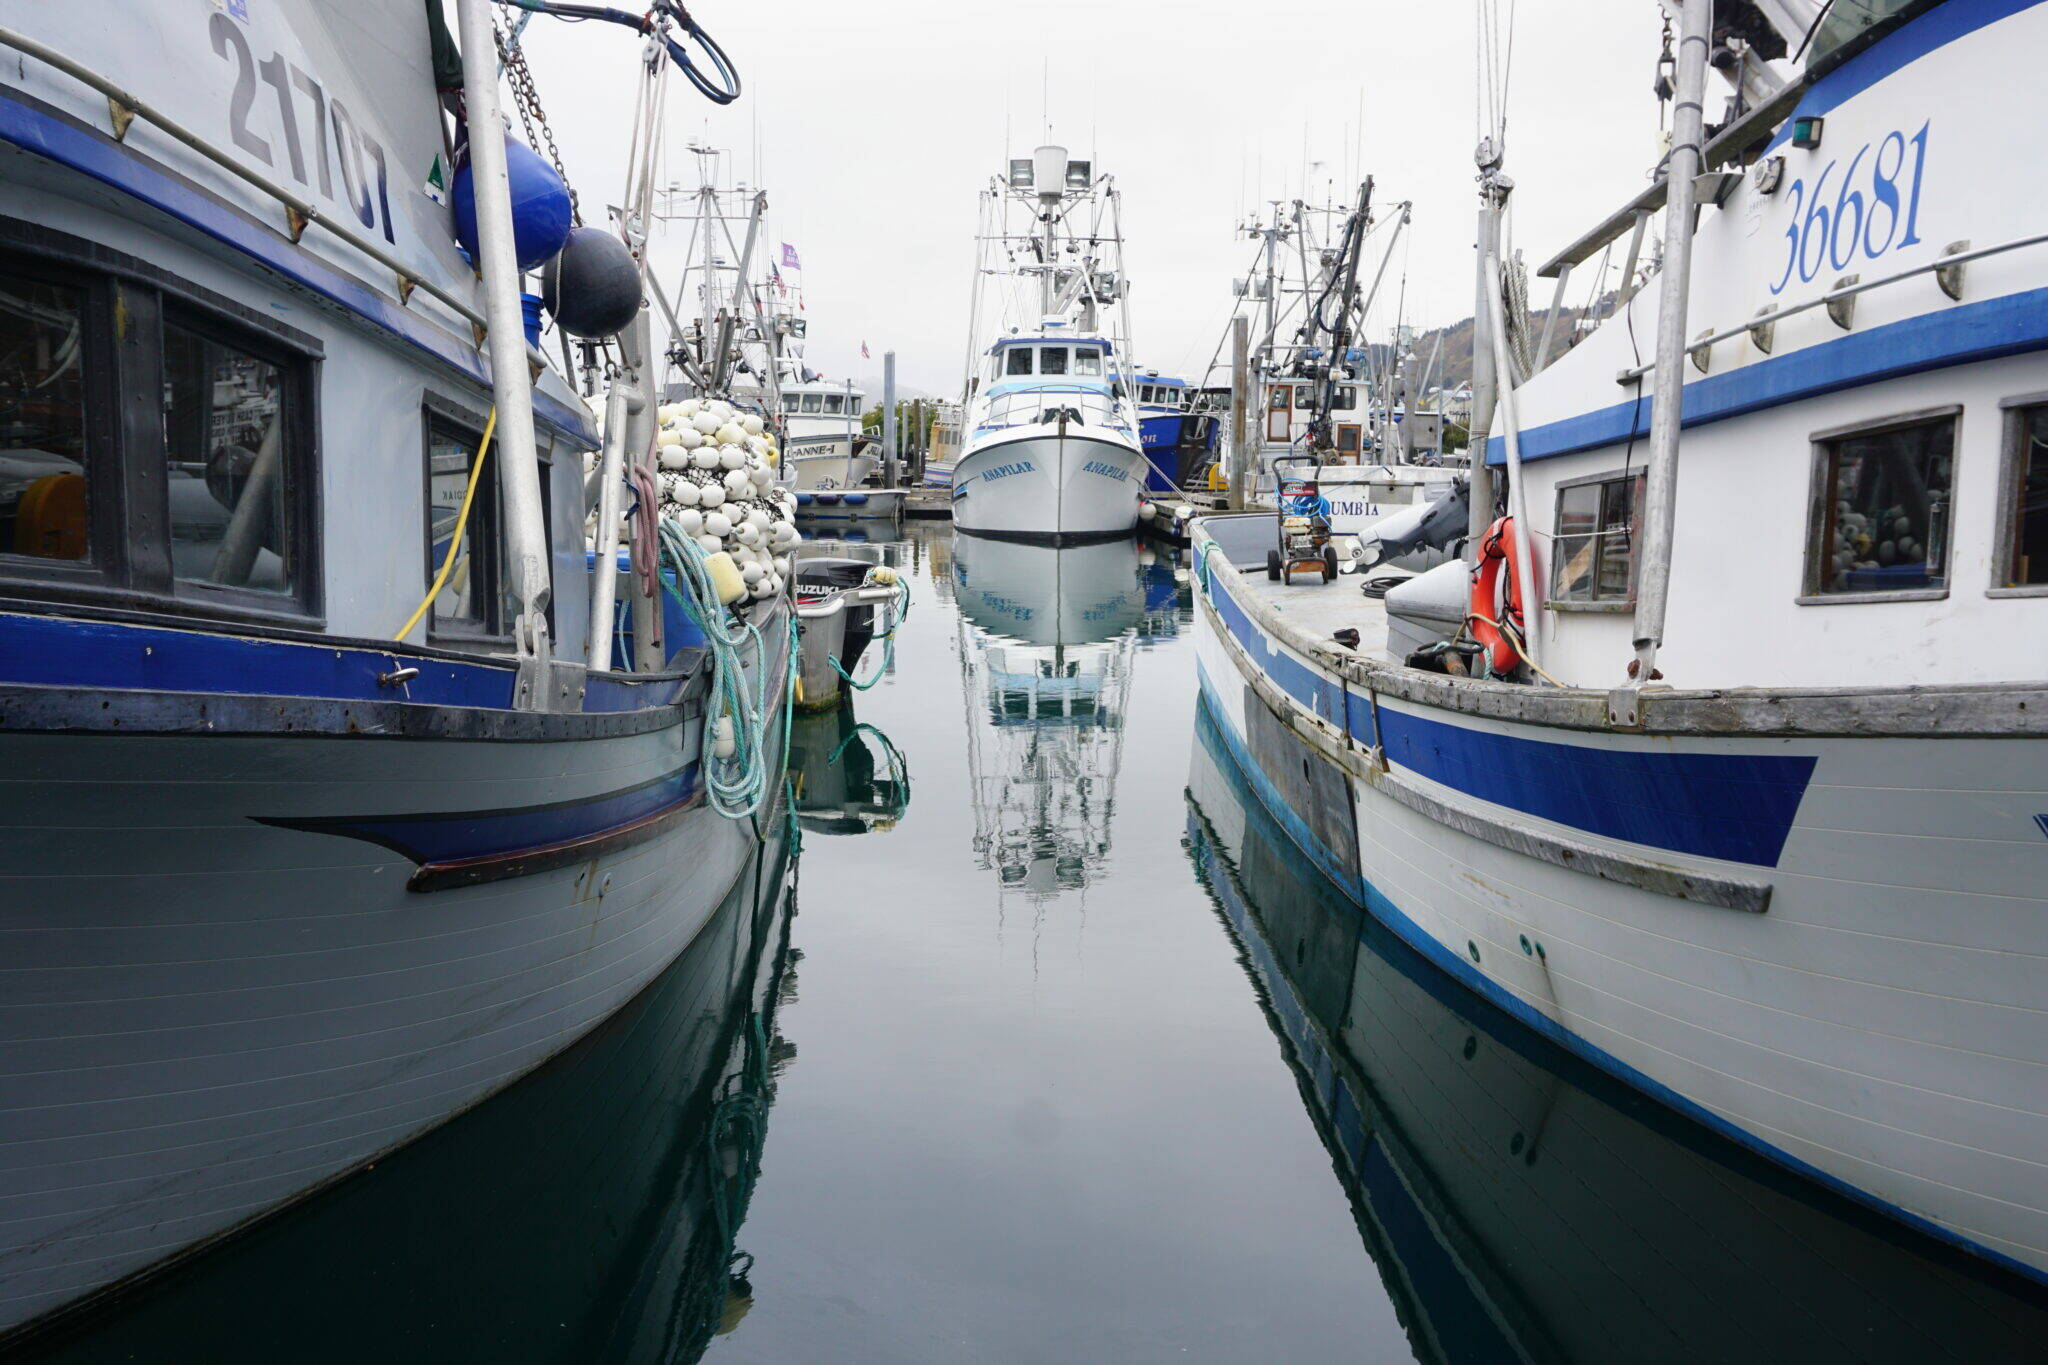 Fishing boats line the docks in Kodiak’s St. Paul Harbor on Oct. 2, 2022. Fish-harvesting employment has been declining since 2015, with multiple factors at play, according to an Alaska Department of Labor and Workforce Development analysis. (Photo by Yereth Rosen/Alaska Beacon)